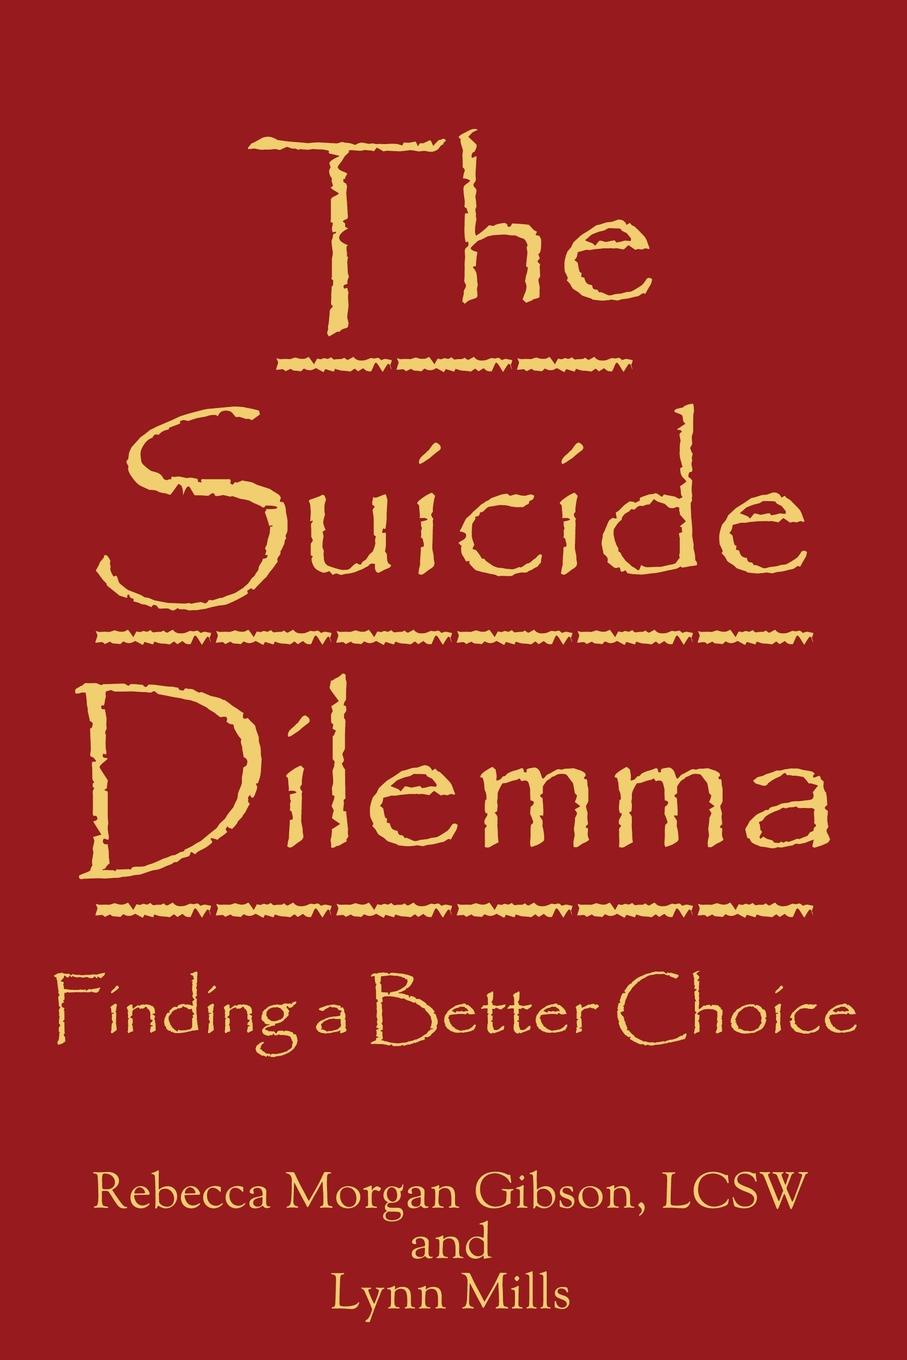 The Suicide Dilemma. Finding a Better Choice